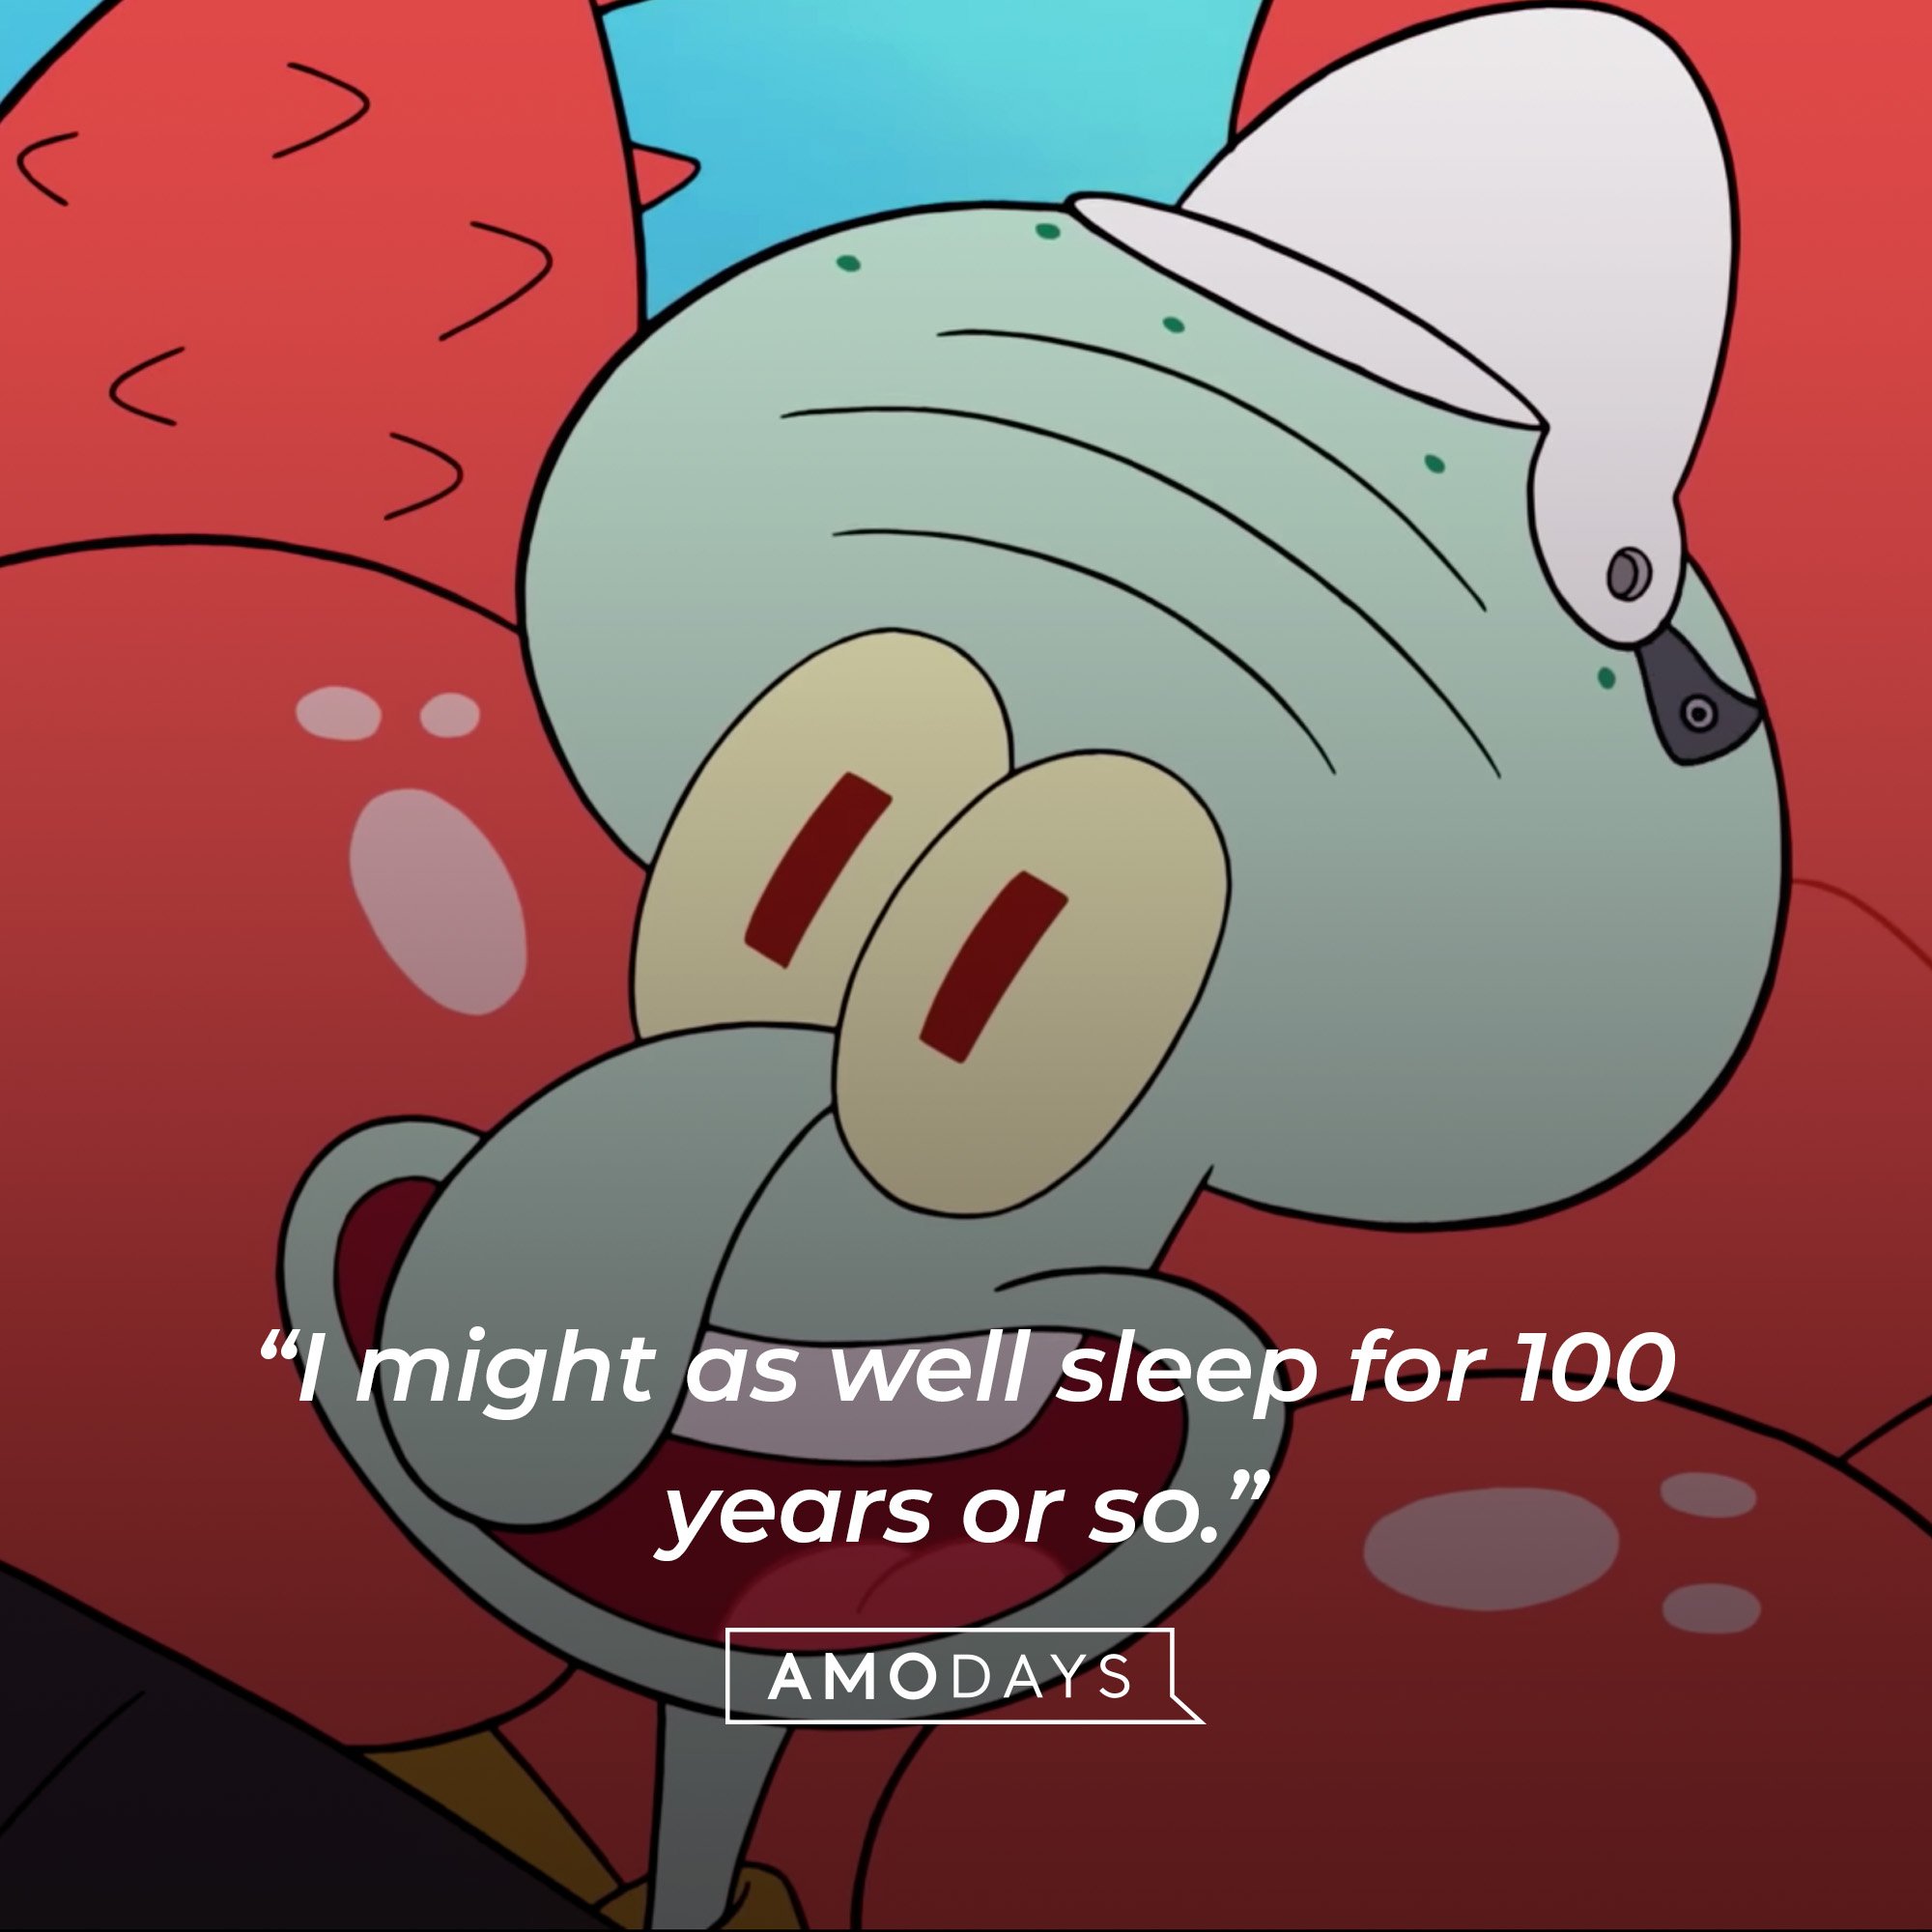 Squidward Tentacles’ quote: "I might as well sleep for 100 years or so.” | Source: AmoDays